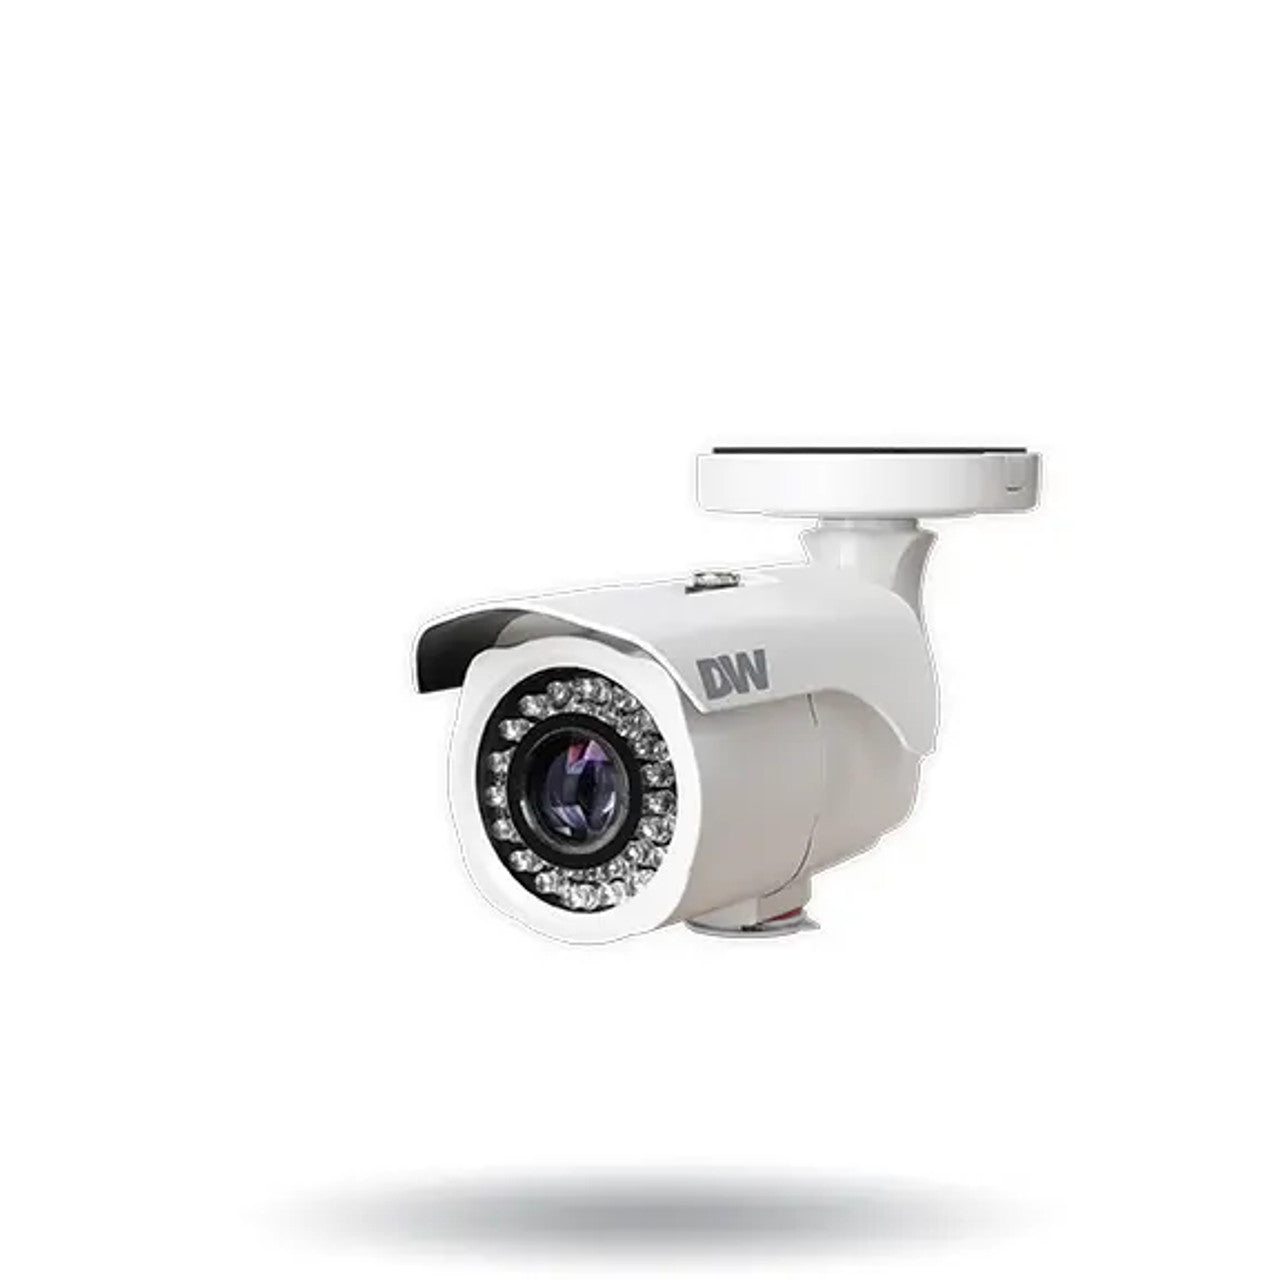 Digital Watchdog DWC-MB44WiAWC5 4MP Night Vision Outdoor Bullet IP Security Camera with 512GB Storage, CaaS